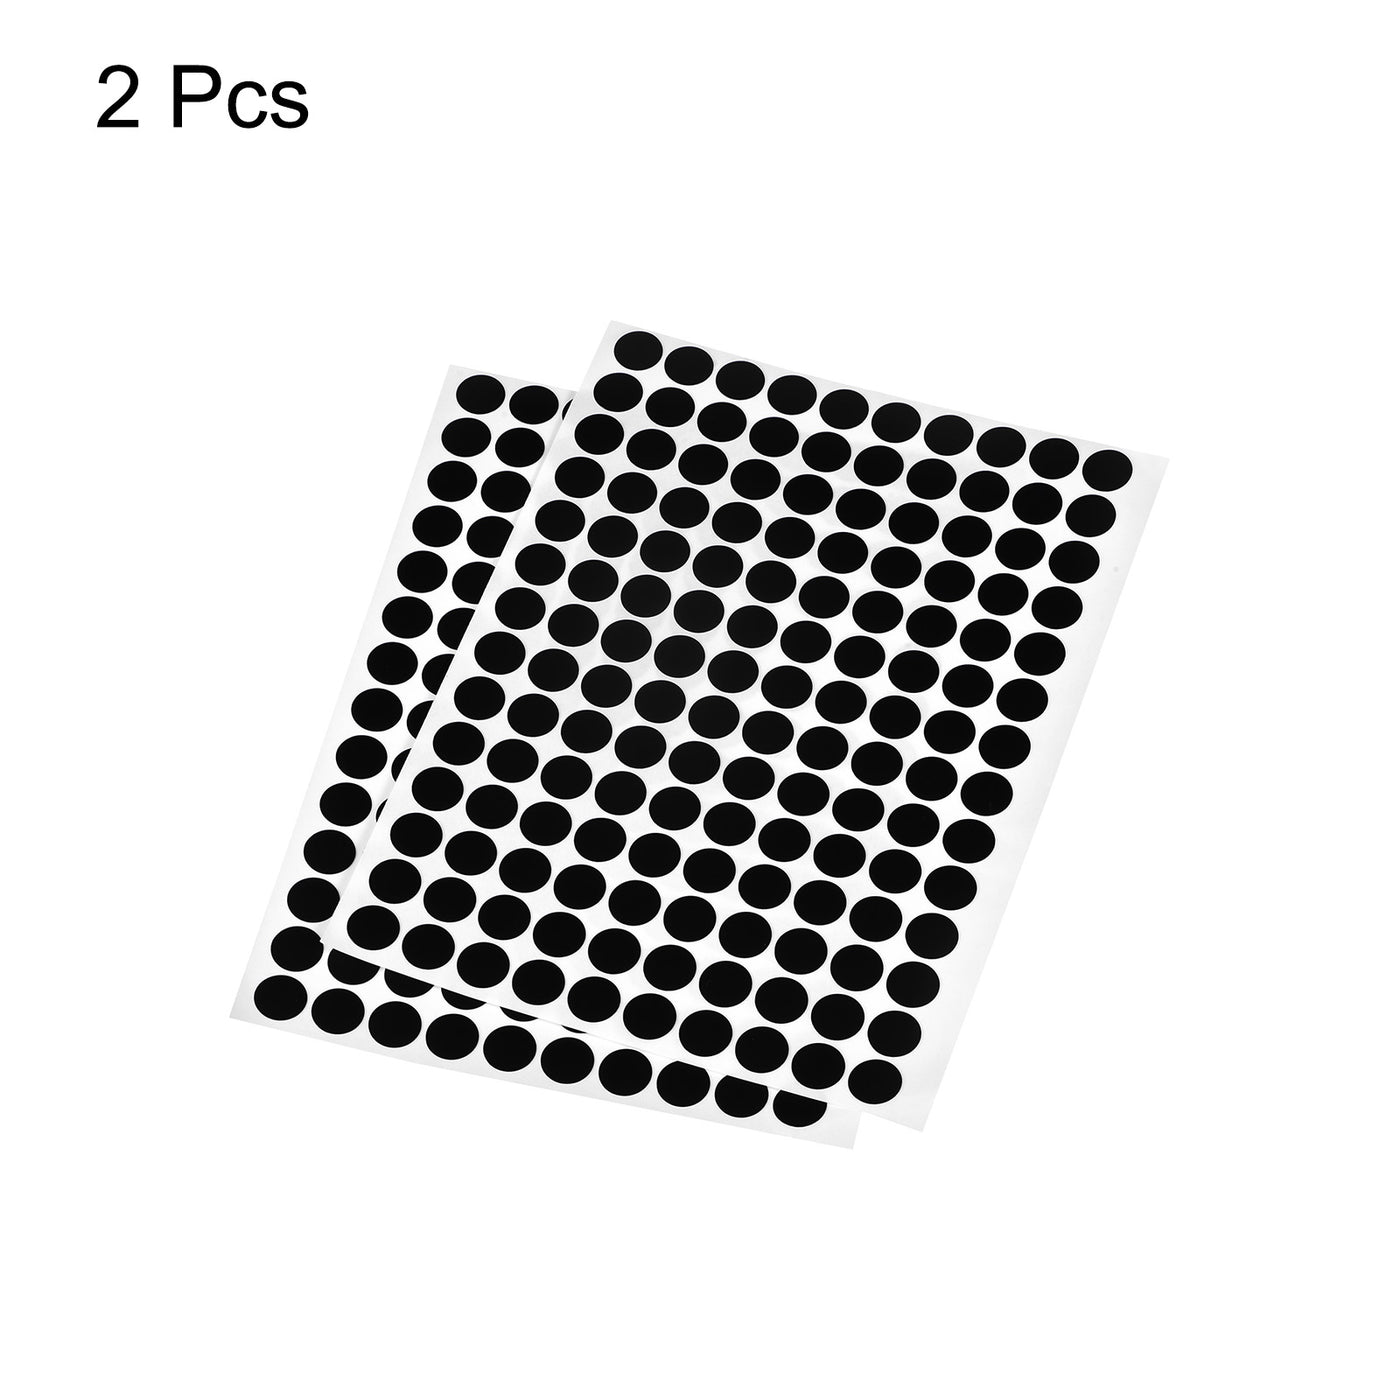 uxcell Uxcell Screw Hole Cover Stickers, 12mm Dia PVC Self Adhesive Covers Caps for Wood Furniture Cabinet Shelf Wardrobe, Black 2 Sheet/280pcs